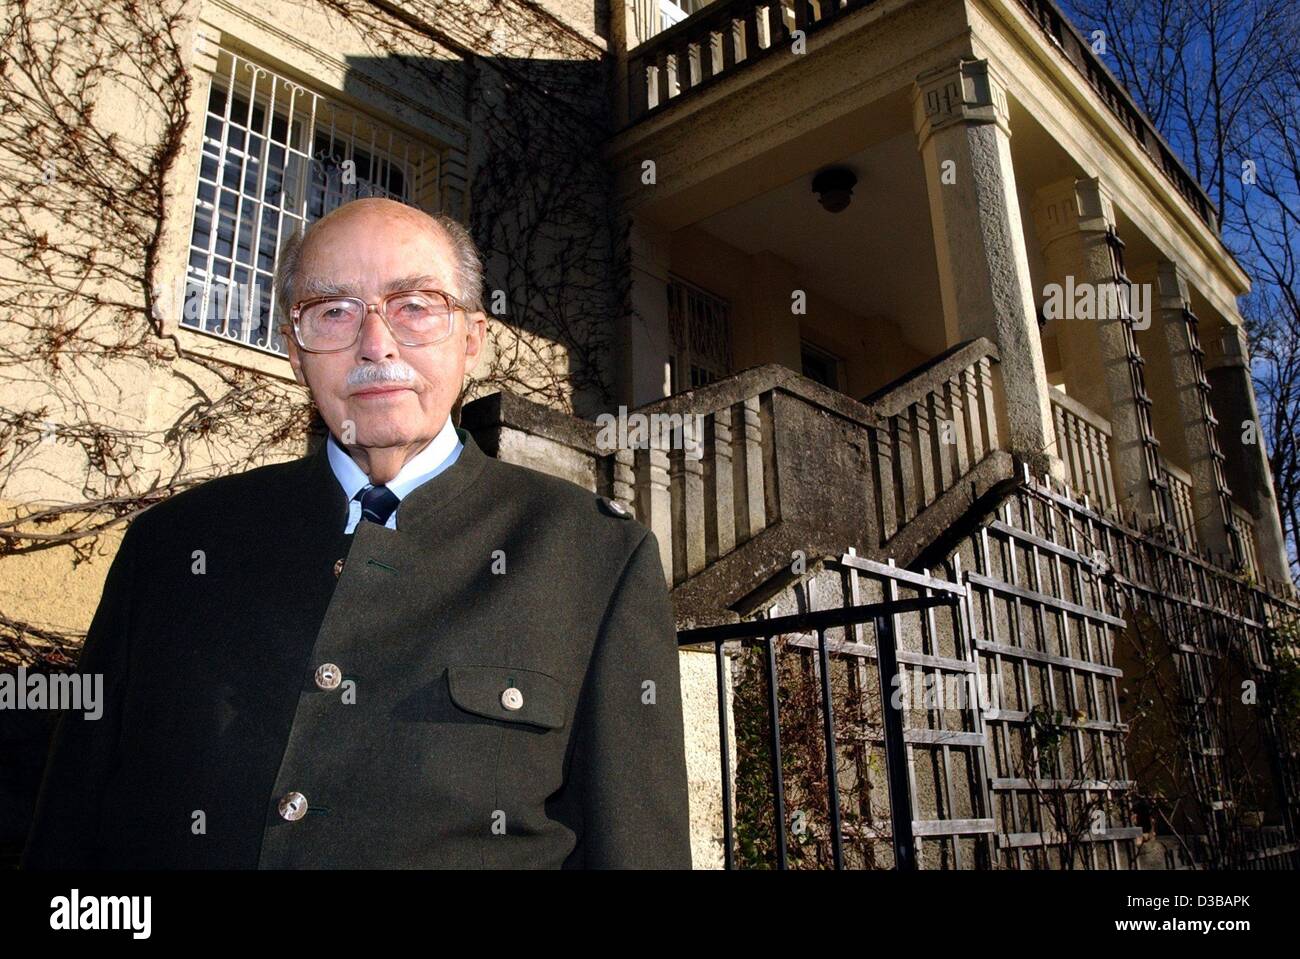 (dpa) - Otto von Habsburg poses in front of his villa in Poecking, Bavaria, 13 November 2002. The oldest son of the last emperor of Austria celebrates his 90th birthday on 20 November 2002. Until his official waiver in 1961 he was the aspirant to the throne of the Austrian emperor and Hungarian king Stock Photo